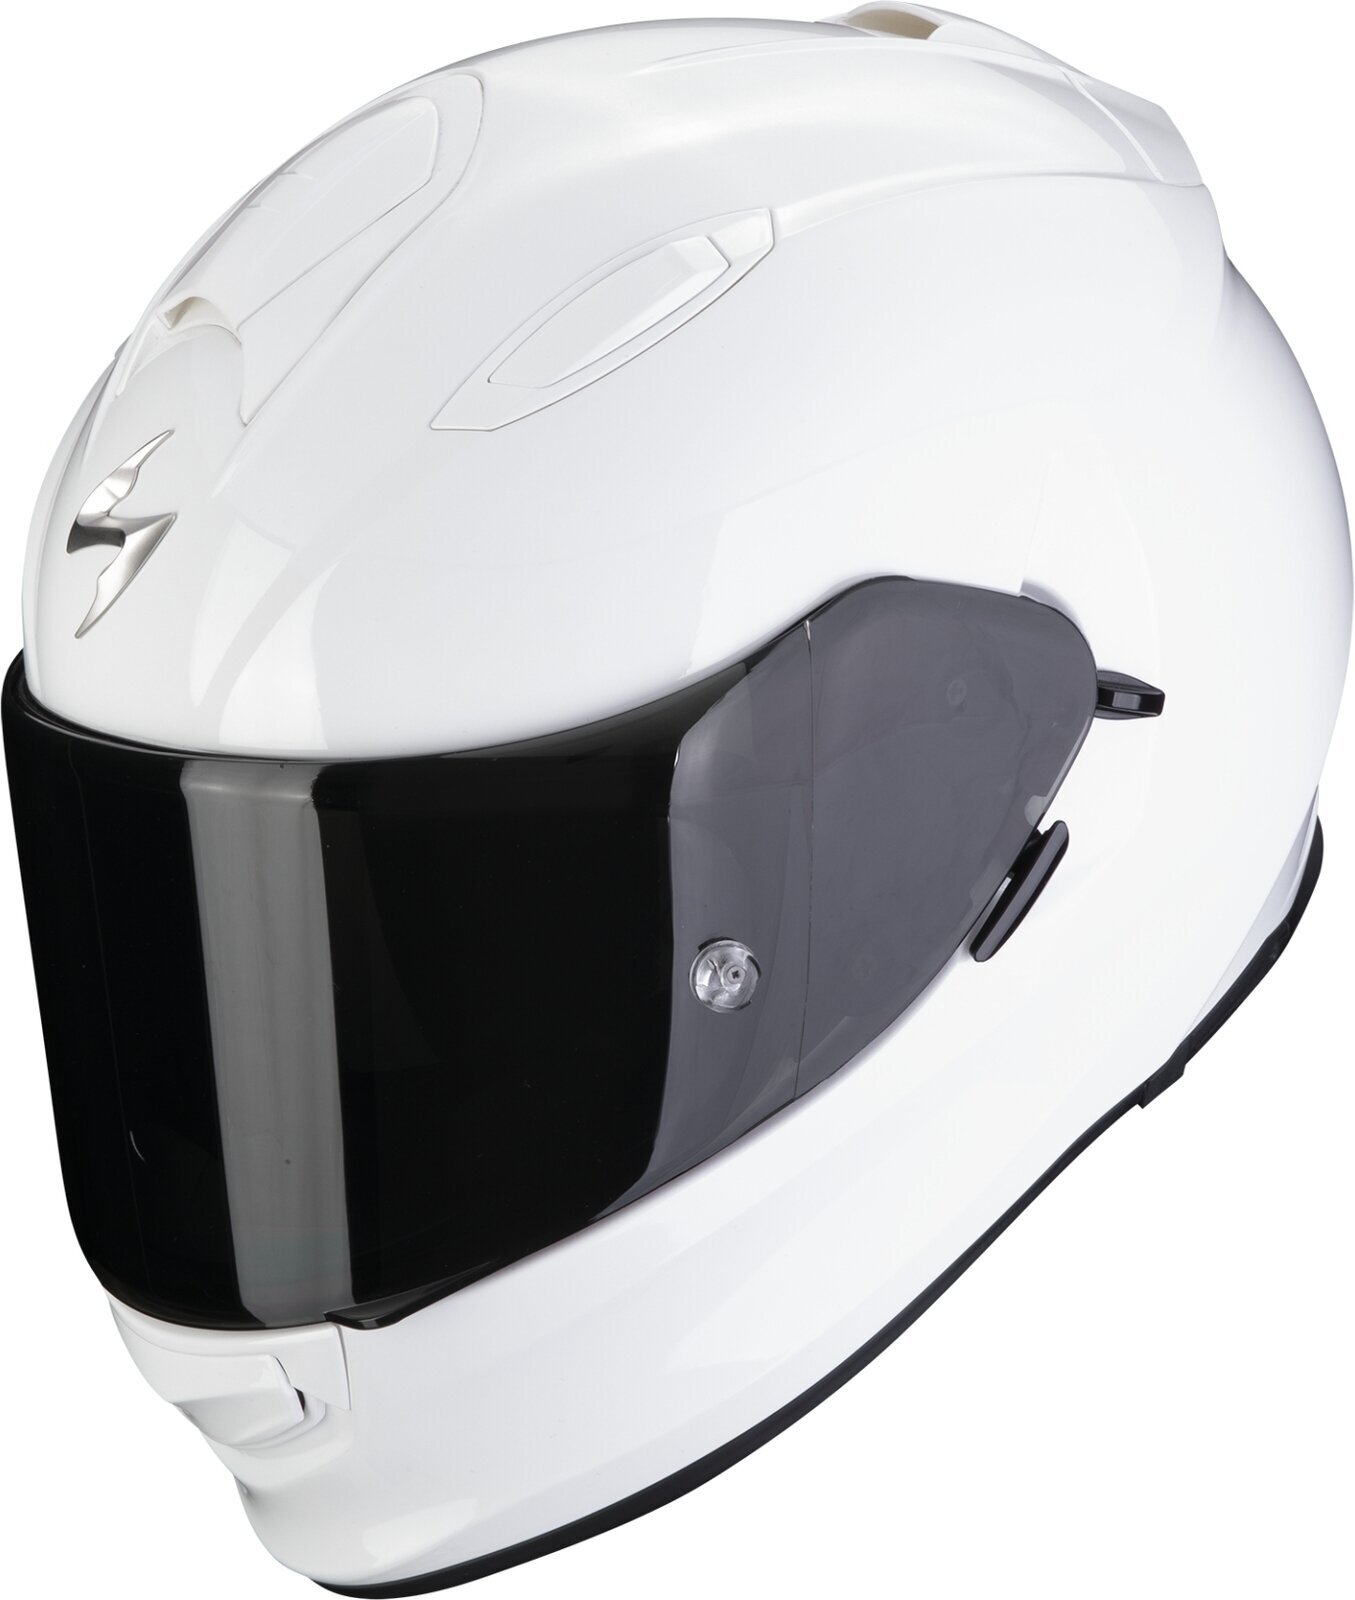 Helm Scorpion EXO 491 SOLID White M Helm